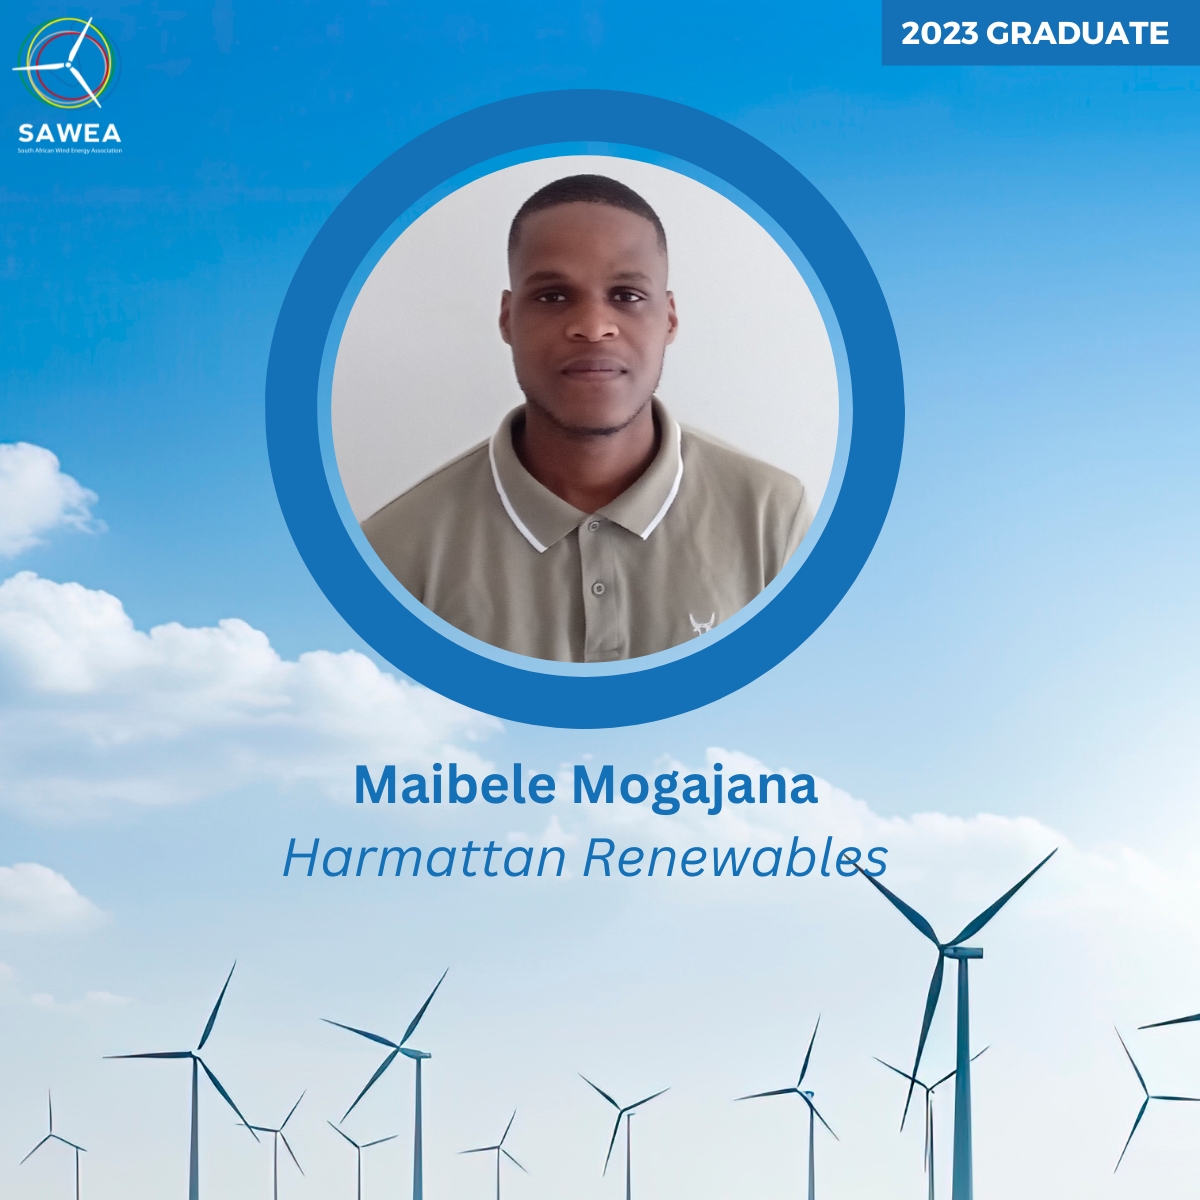 GRADUATE ALERT 👨‍🎓 Congratulations to Harmattan Renewables's intern, Maibele Rapula for completing his National Dip in financial accounting - Boston City Campus & Business College. #2023graduate #leadingwithwind #sawea